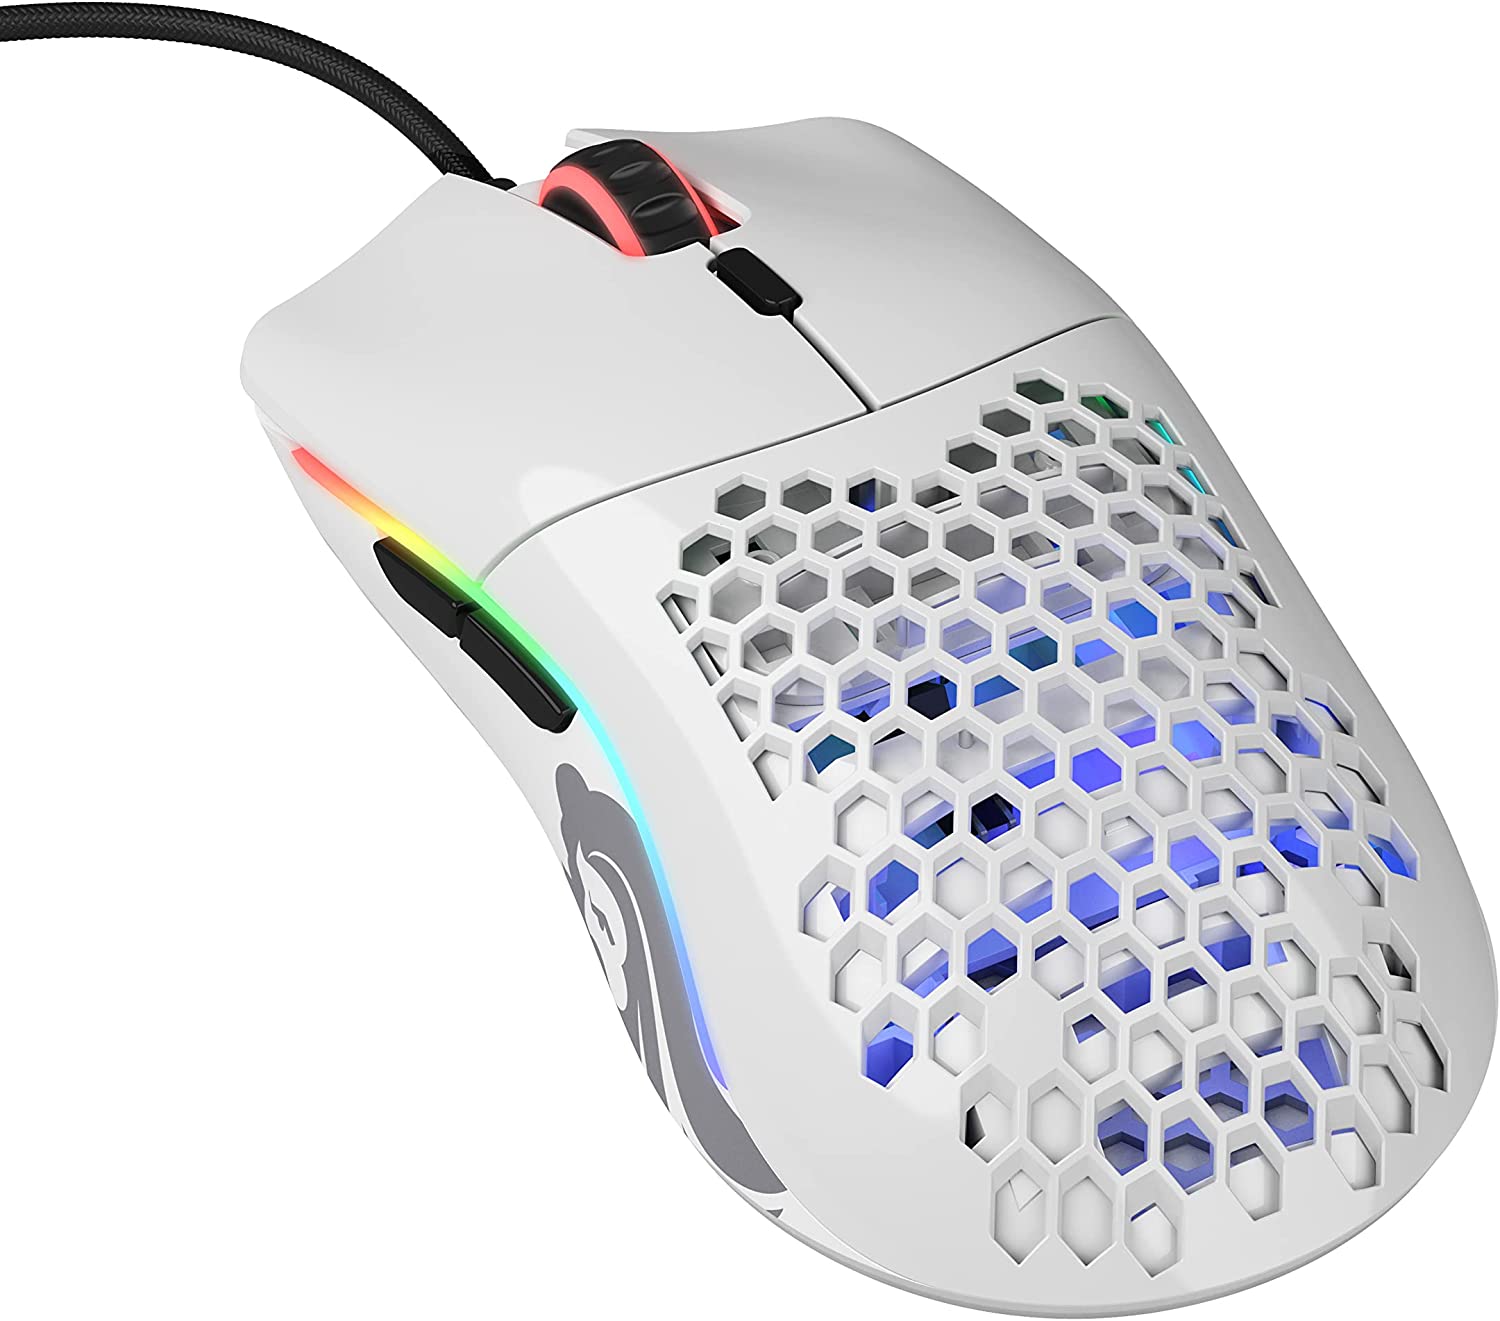 GLORIOUS MODEL O GLOSSY WHITE WIRED MOUSE - GO-GWHITE-N